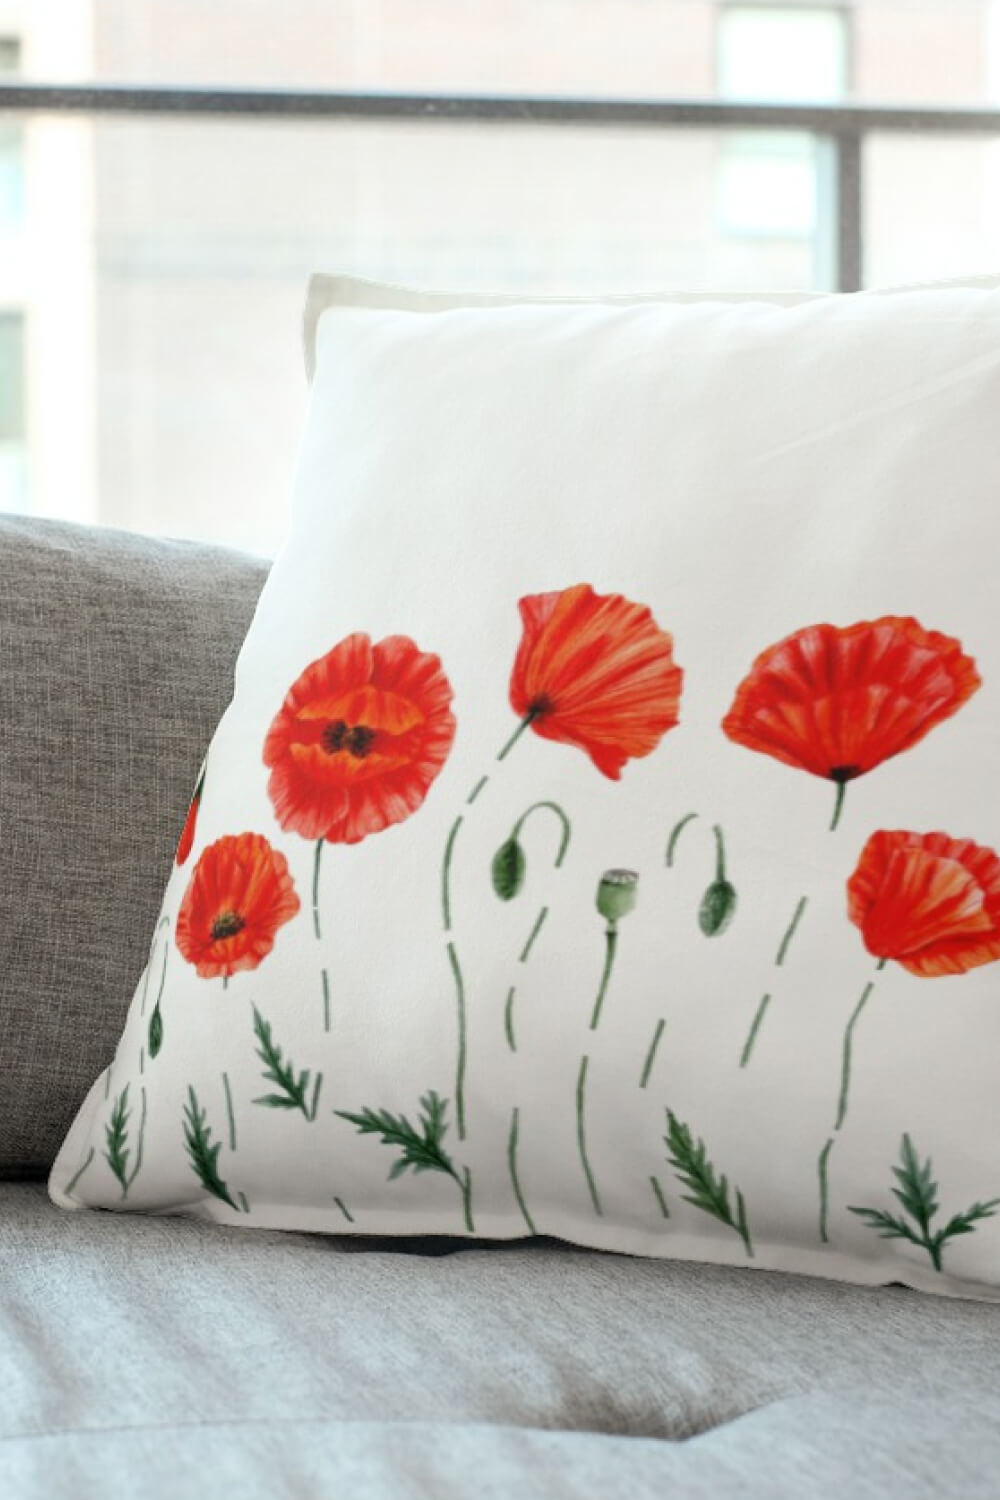 Poppies on a Pillow Vertical Image.